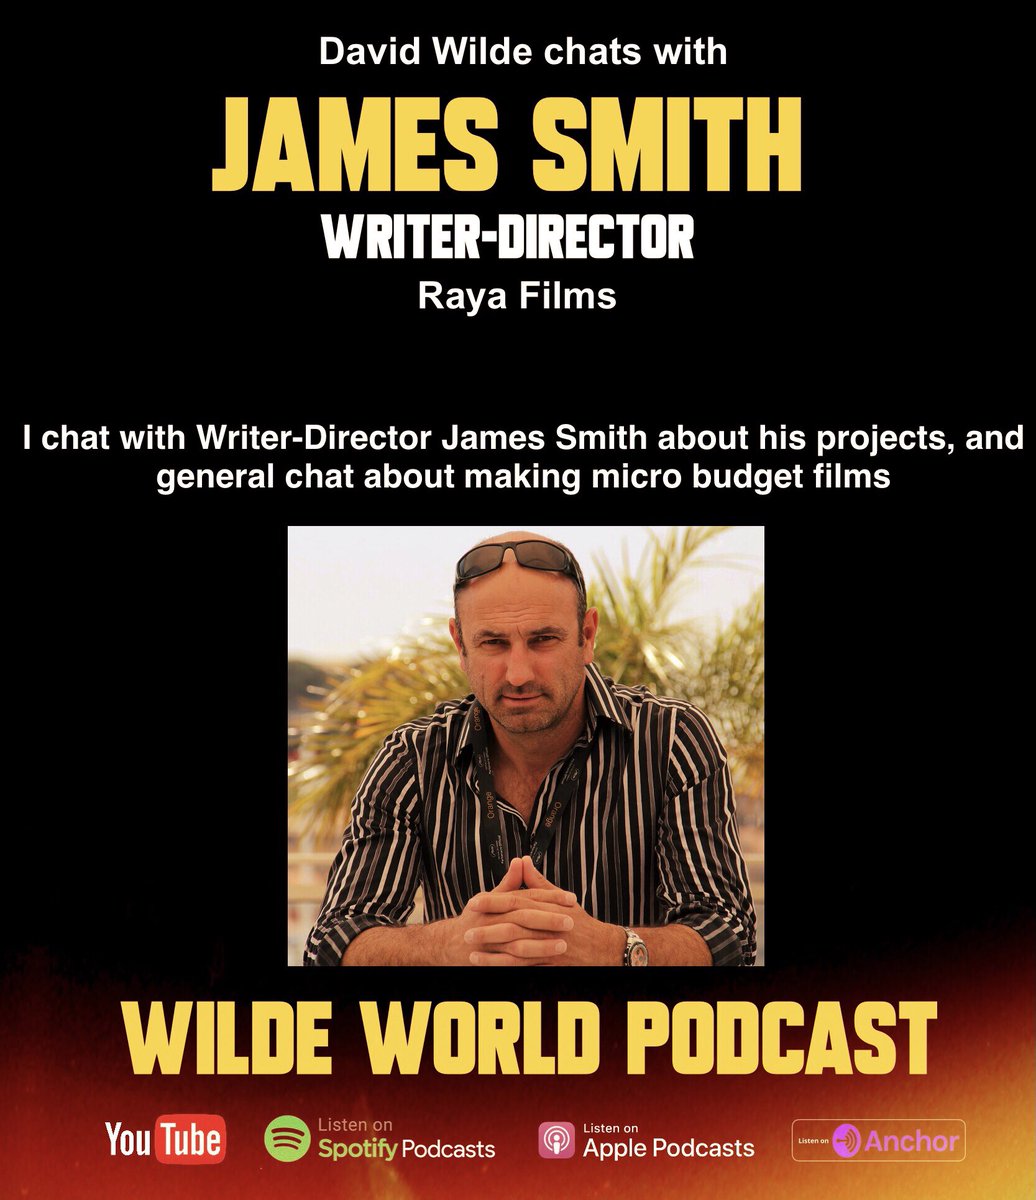 My chat with James Smith @jsmithwriter Talking about @RayaFilms film slate and micro budget filmmaking.

youtu.be/Moz_jnbkyNY

Links to audio platforms on #YouTube video 

#indiefilm #rayafilmslondon #podcast #filmpodcast